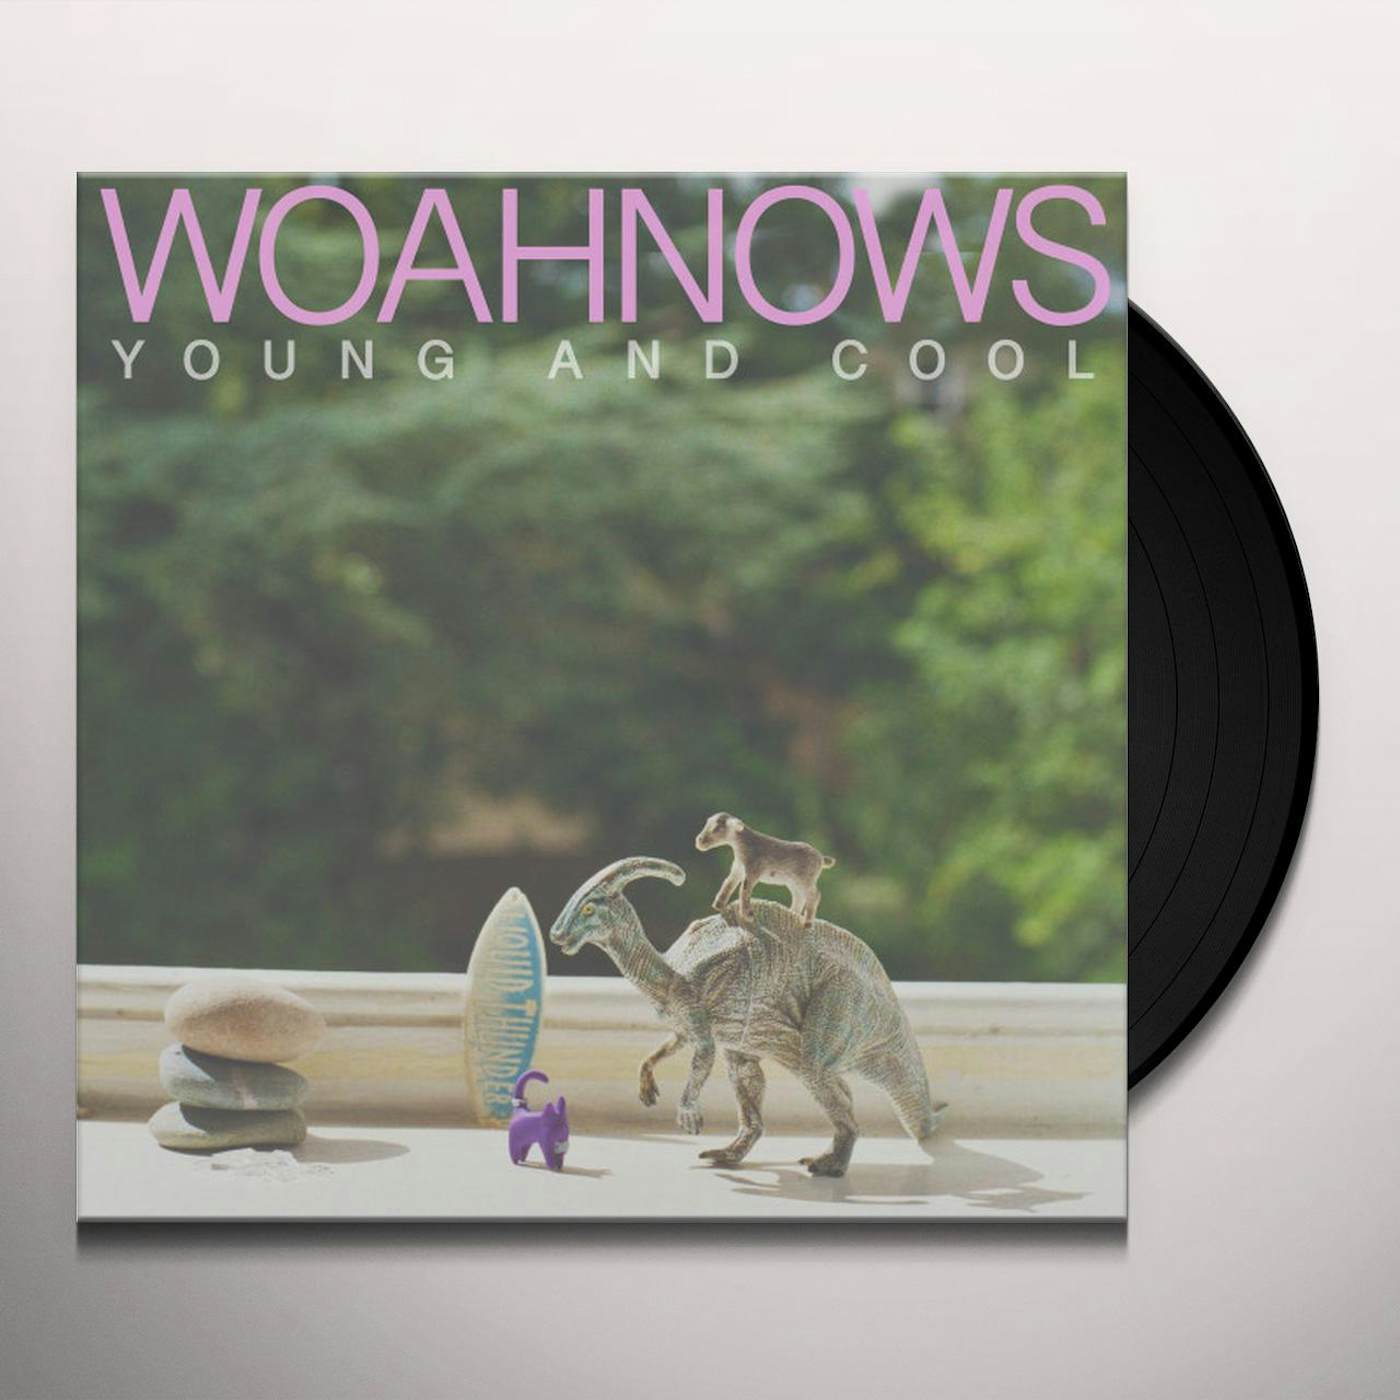 Woahnows Young and Cool Vinyl Record